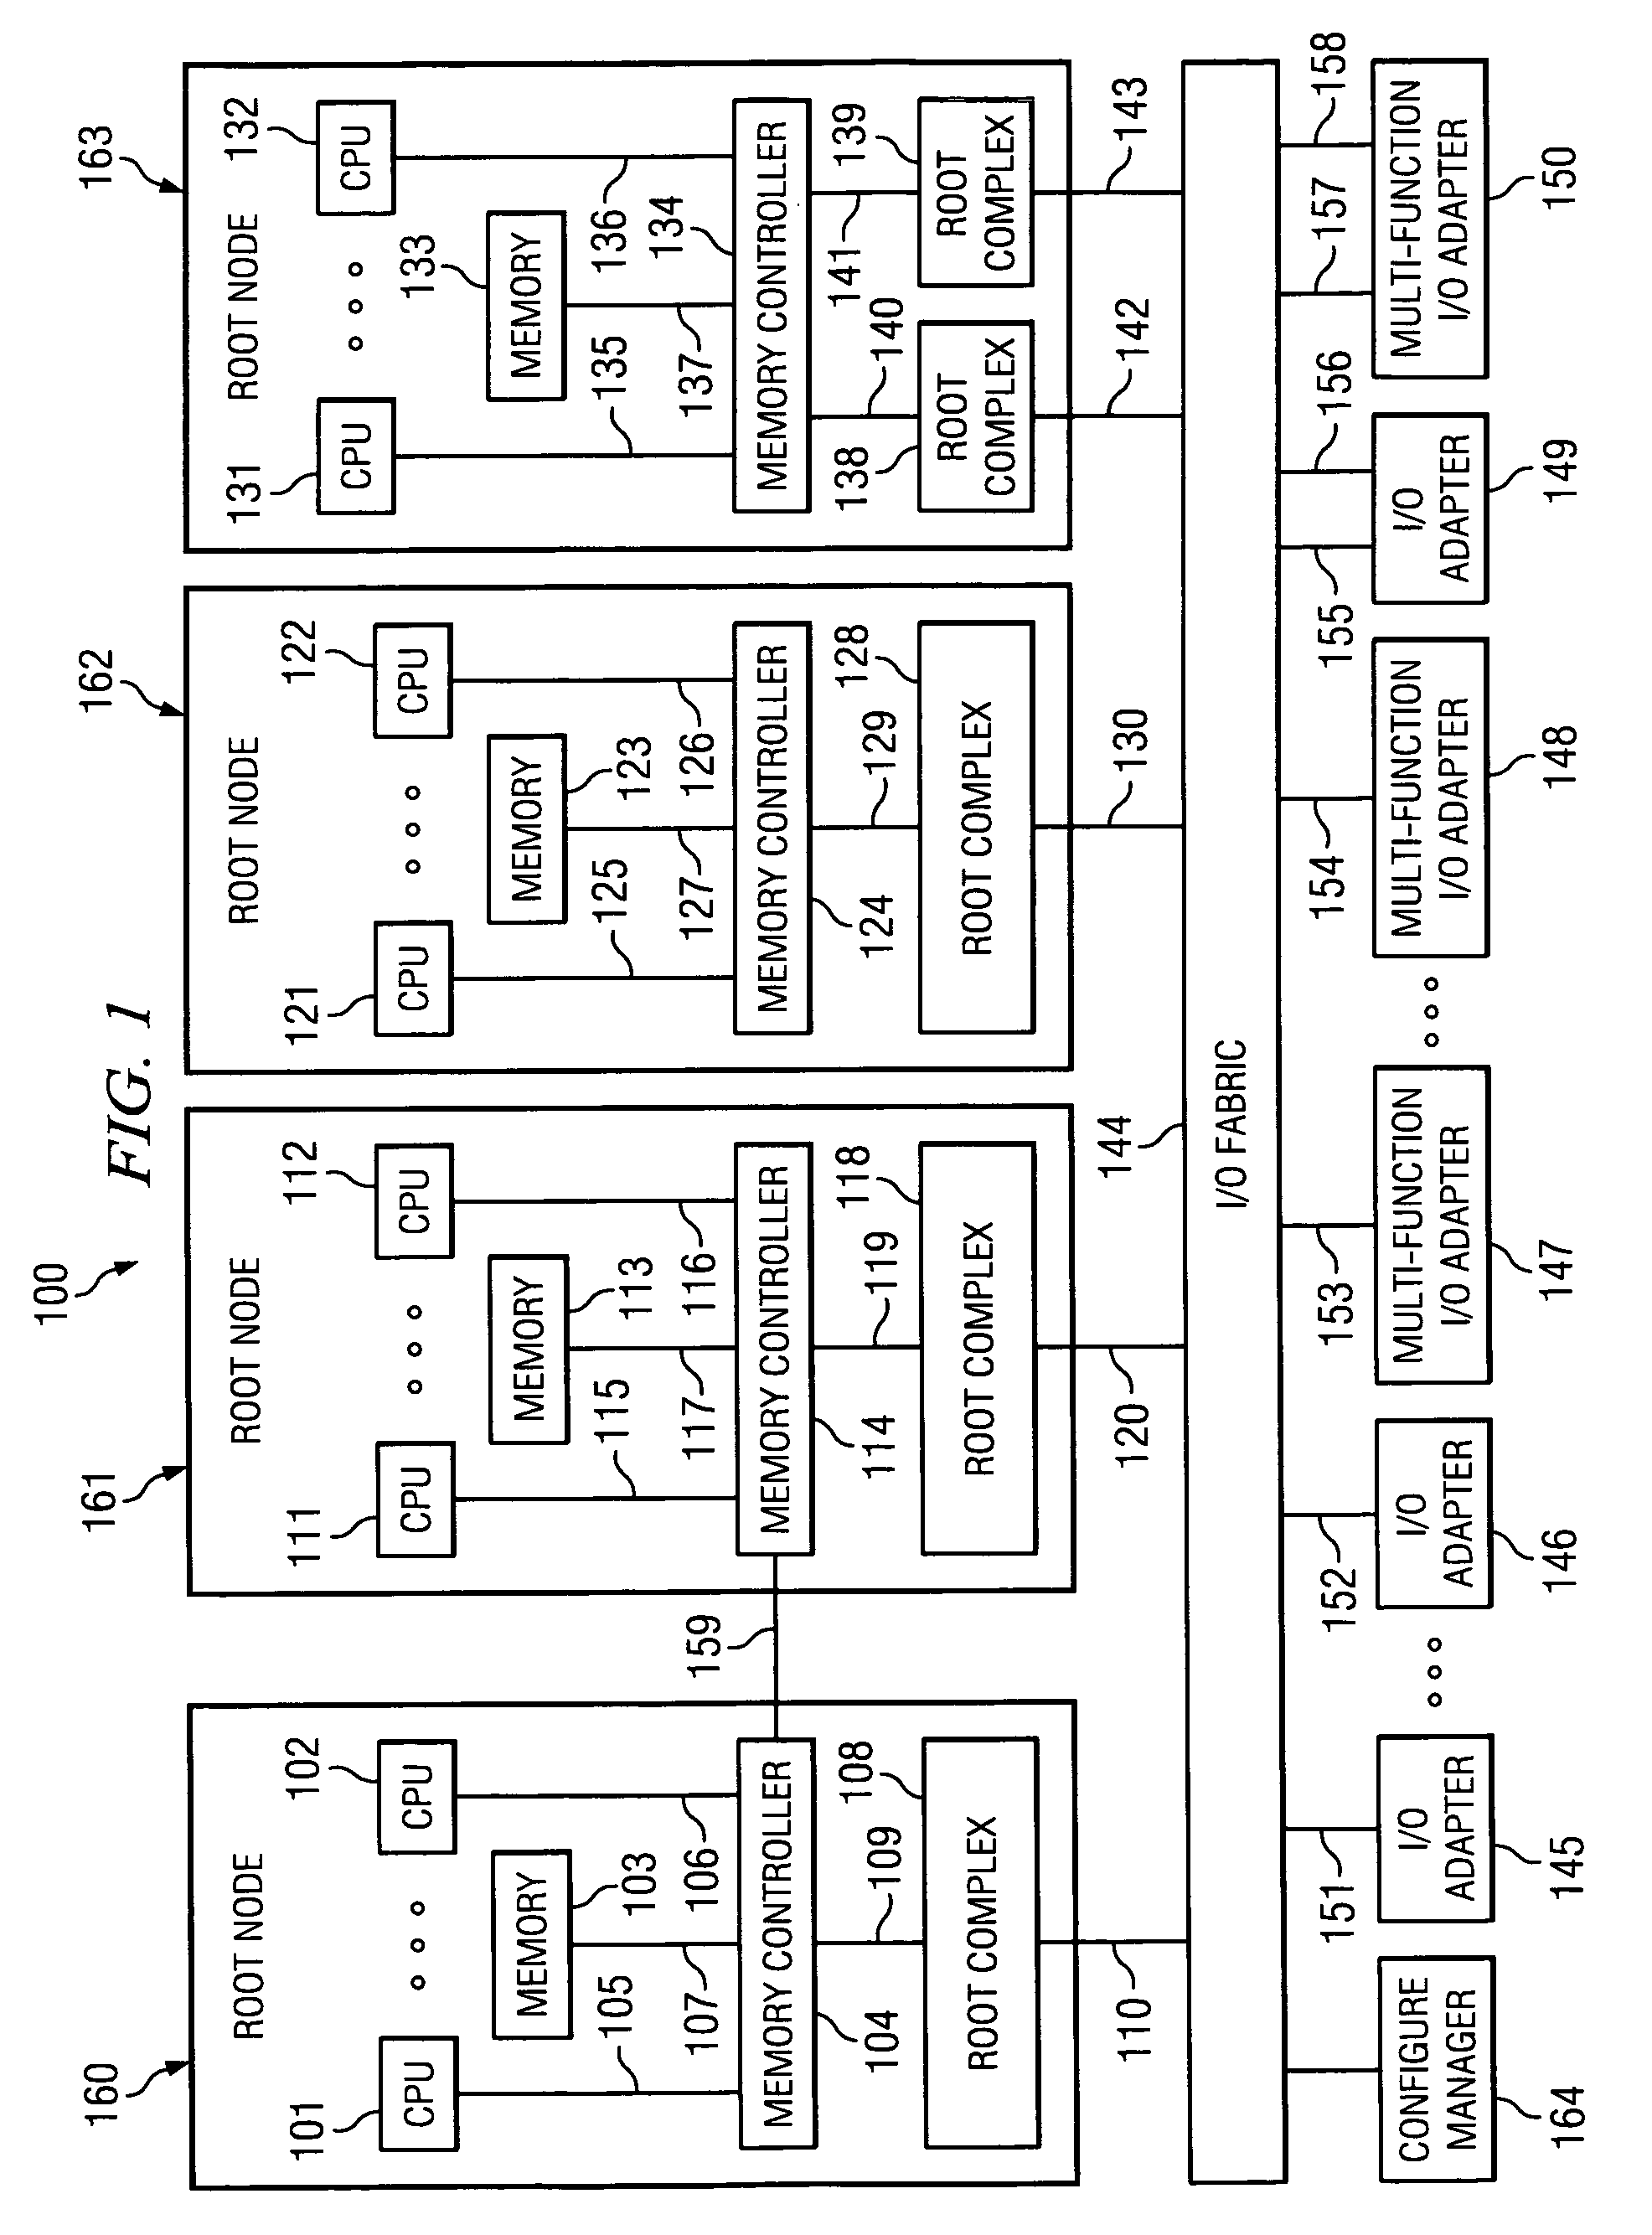 Routing mechanism in PCI multi-host topologies using destination ID field